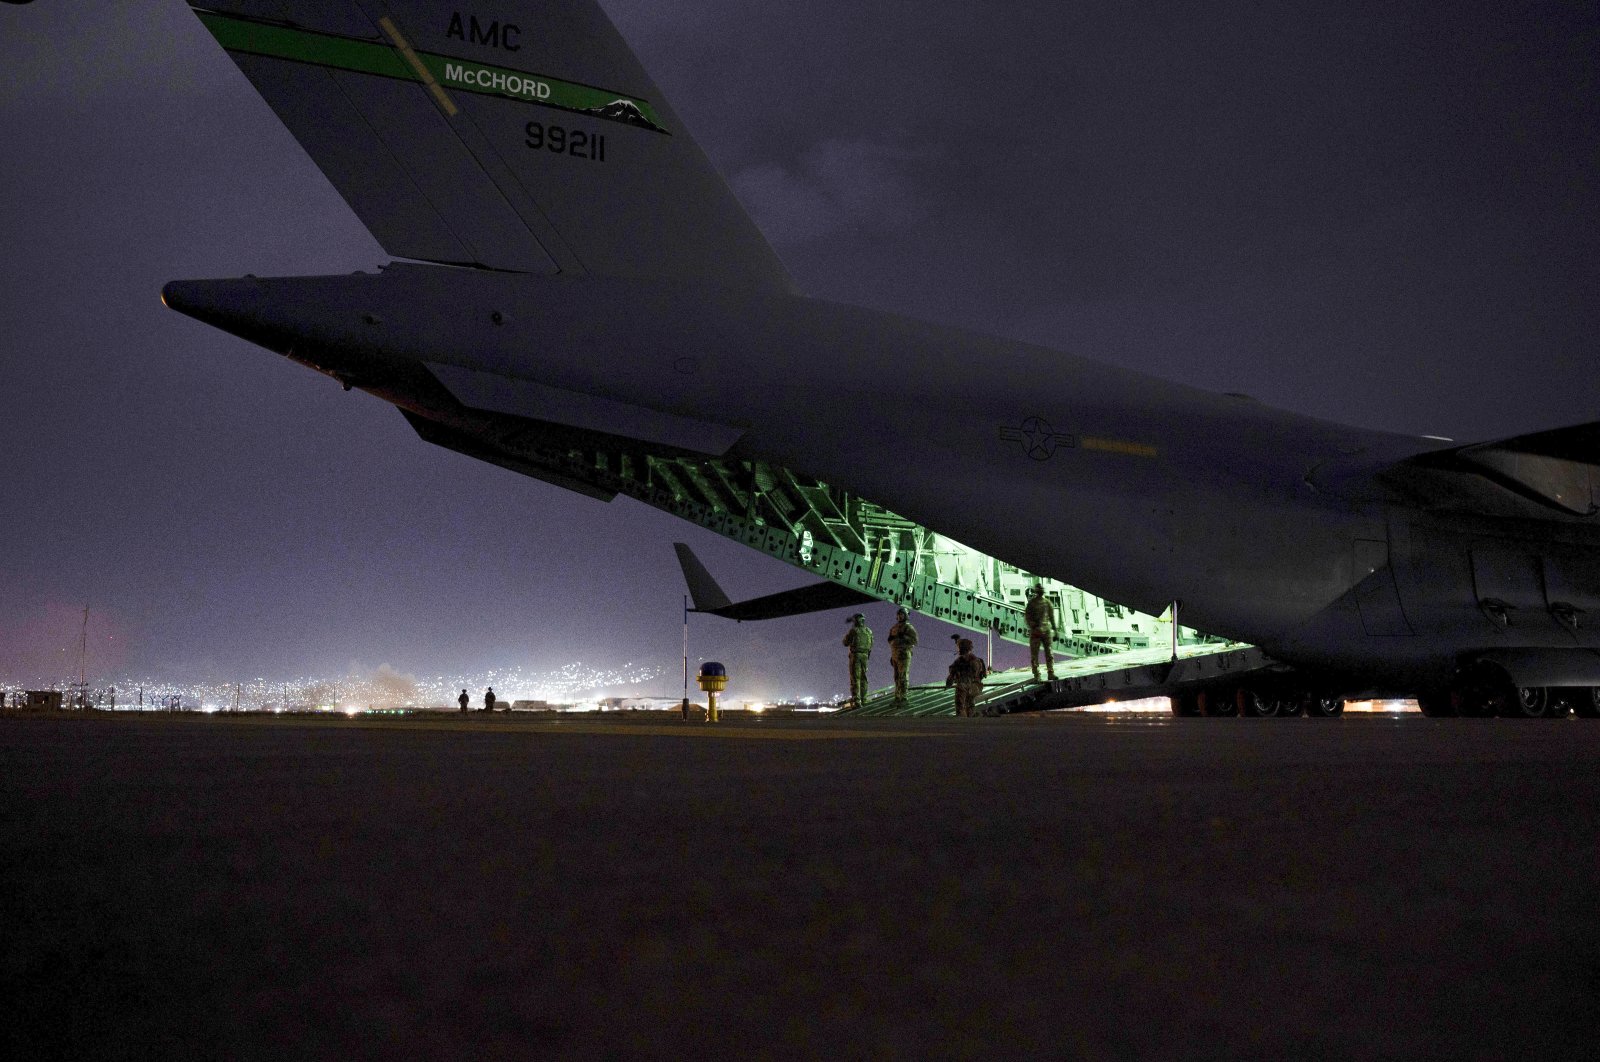 An Air Force aircrew, assigned to the 816th Expeditionary Airlift Squadron, prepares to receive soldiers, assigned to the 82nd Airborne Division, to board a U.S. Air Force C-17 Globemaster III aircraft in support of the final noncombatant evacuation operation missions at Kabul Hamid Karzai International Airport in Kabul, Afghanistan, Aug. 30, 2021. (Senior Airman Taylor Crul/U.S. Air Force via AP)